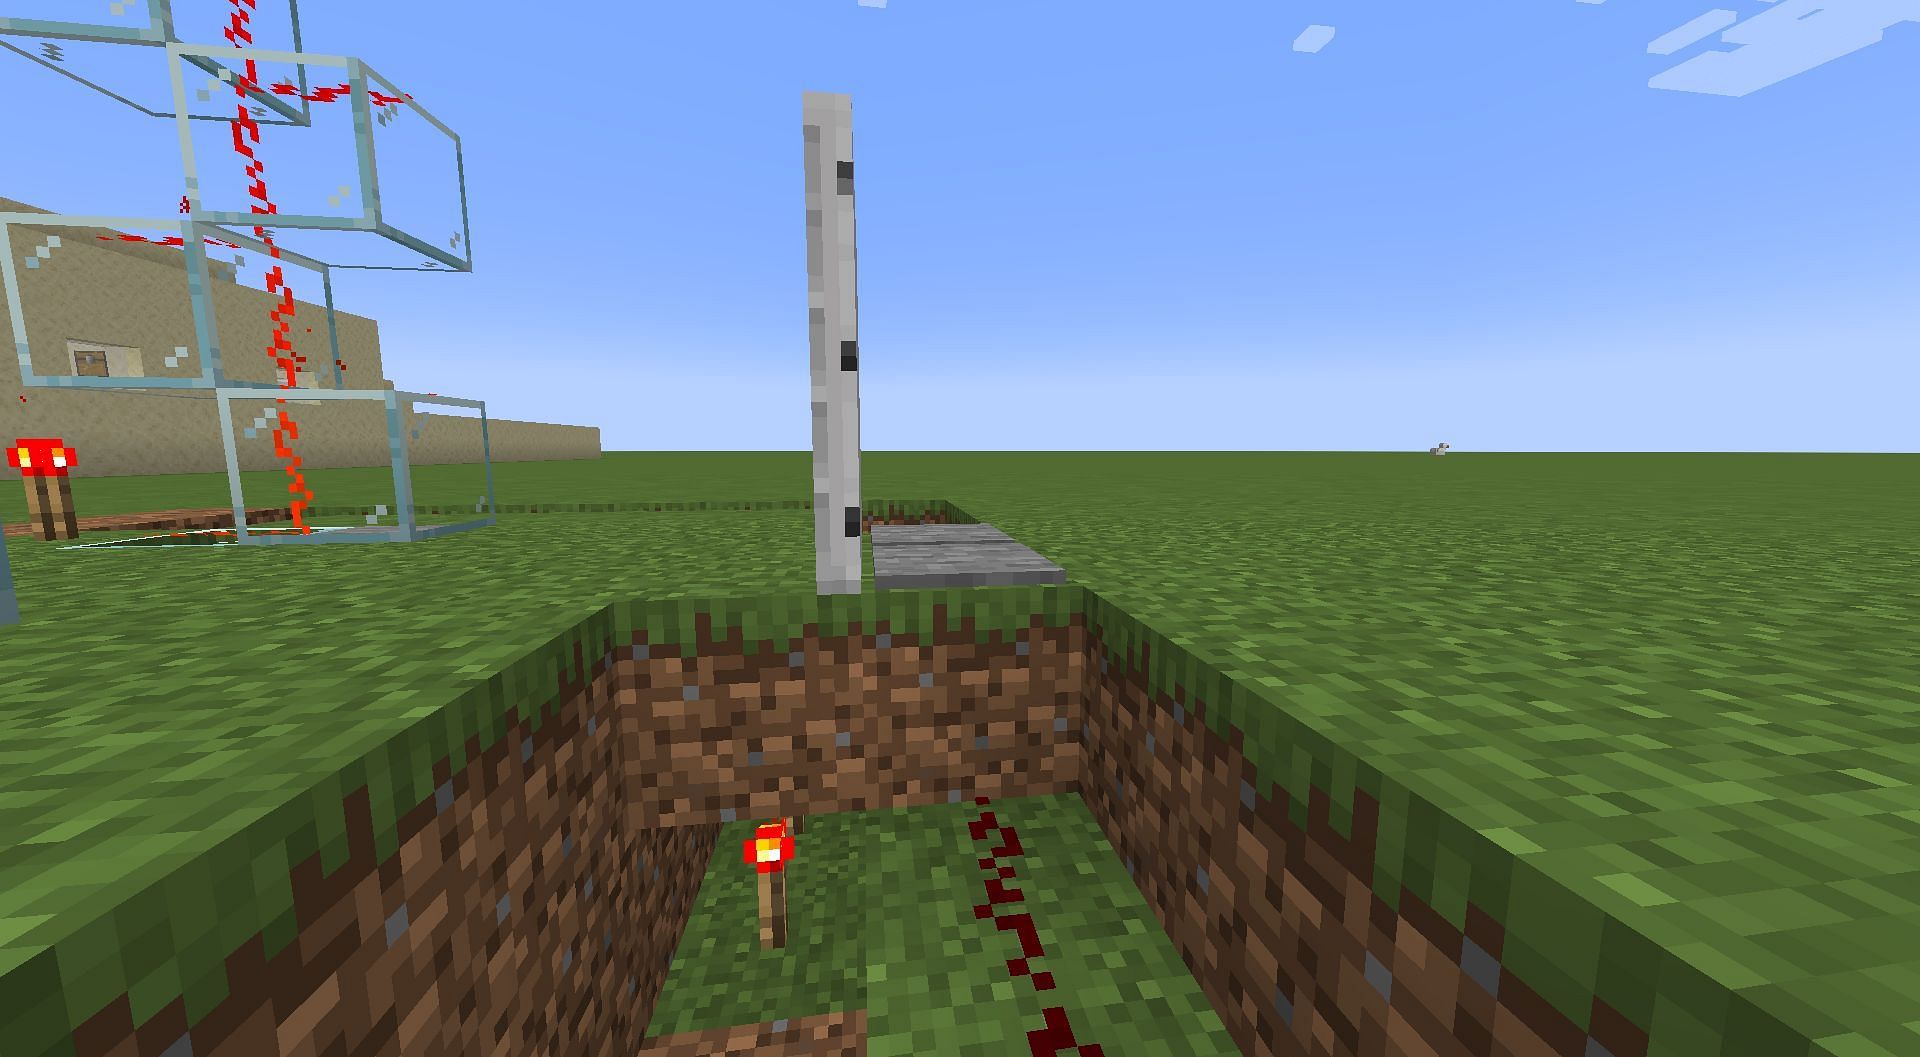 Iron doors activated with redstone torch (Image via Minecraft)